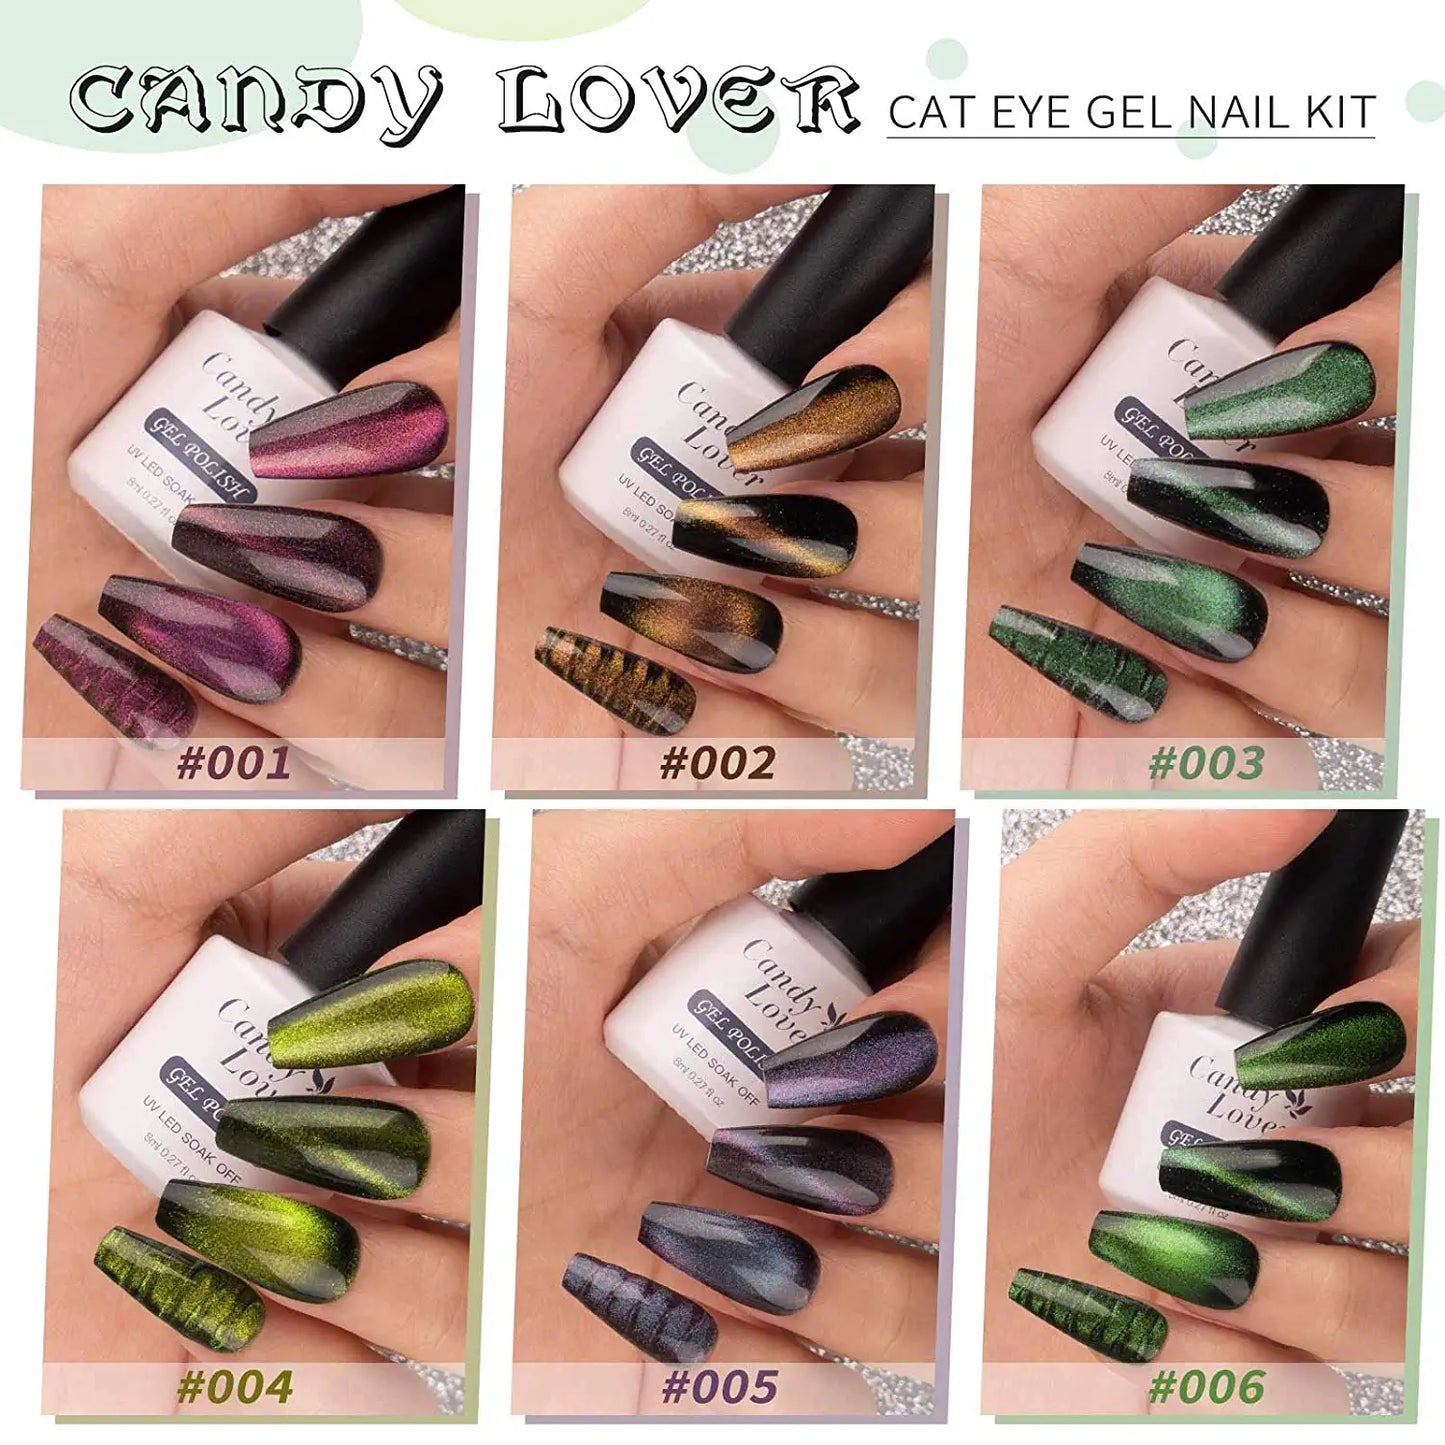 9D Cat Eye Gel Nail Polish Kit - Candy Lover 6 Selected Sparkle Colors